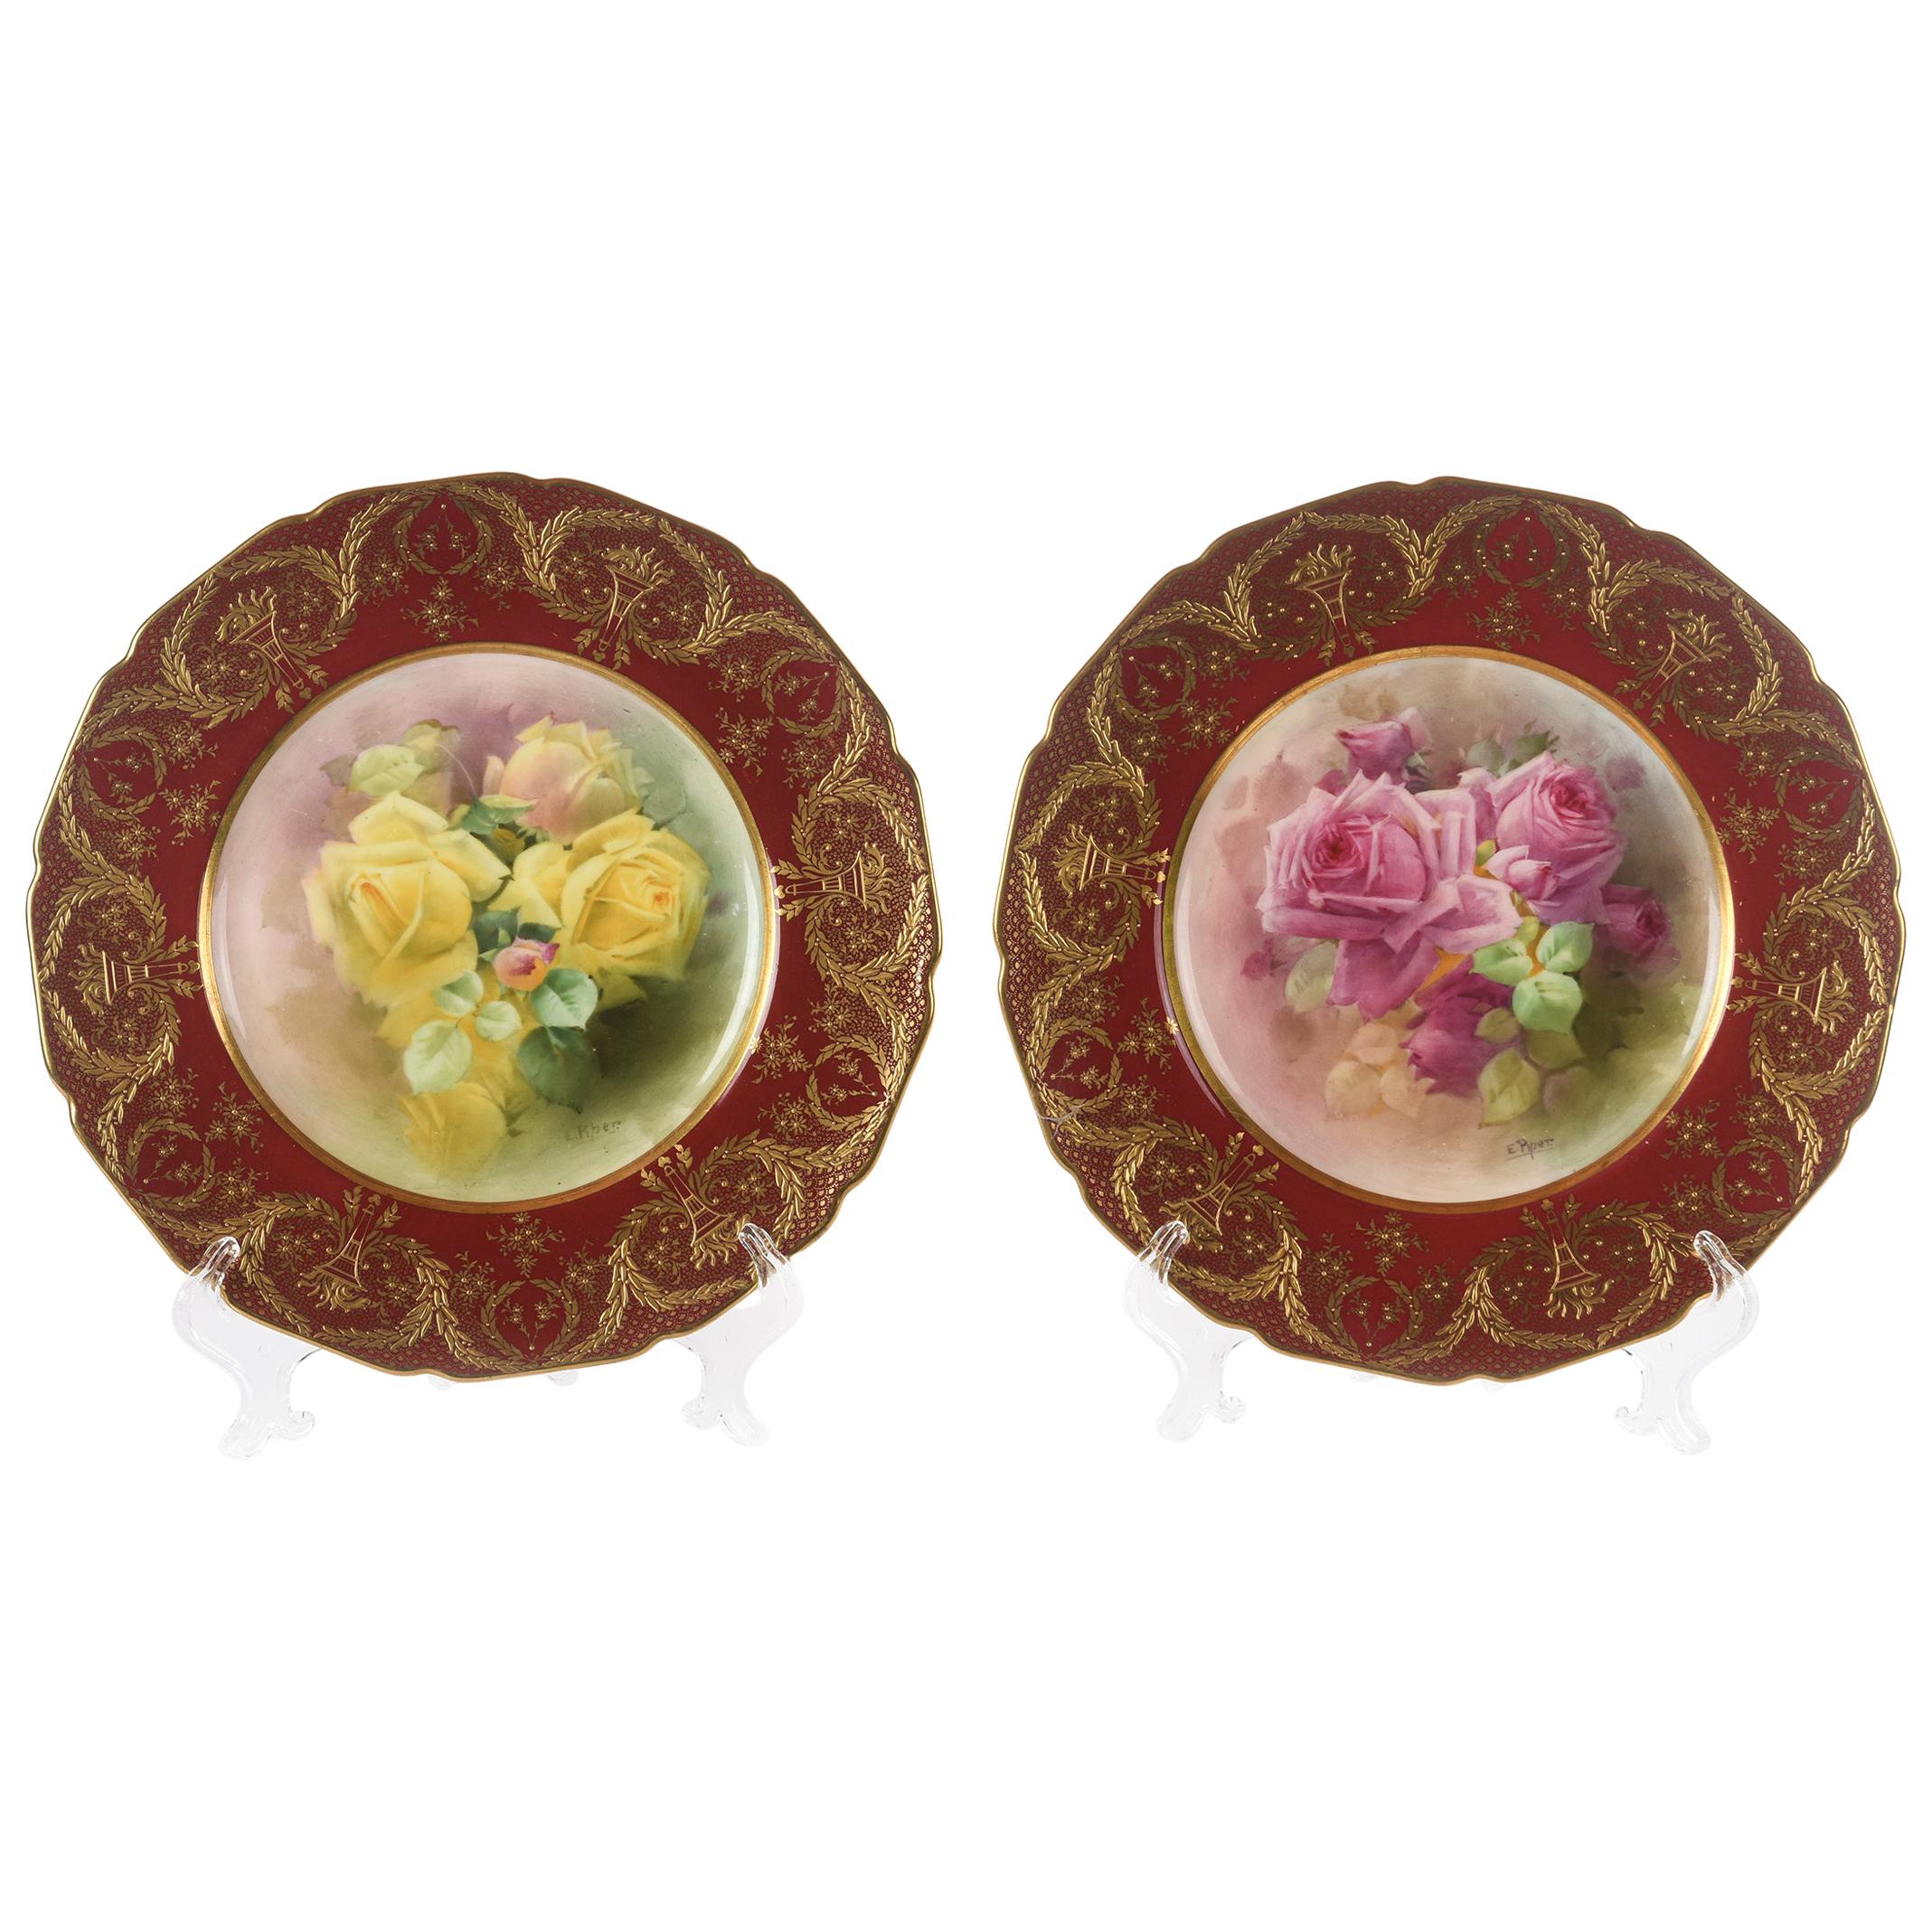 Pair of Exquisite Cabinet Plates, Antique Royal Doulton England, Gilt Encrusted